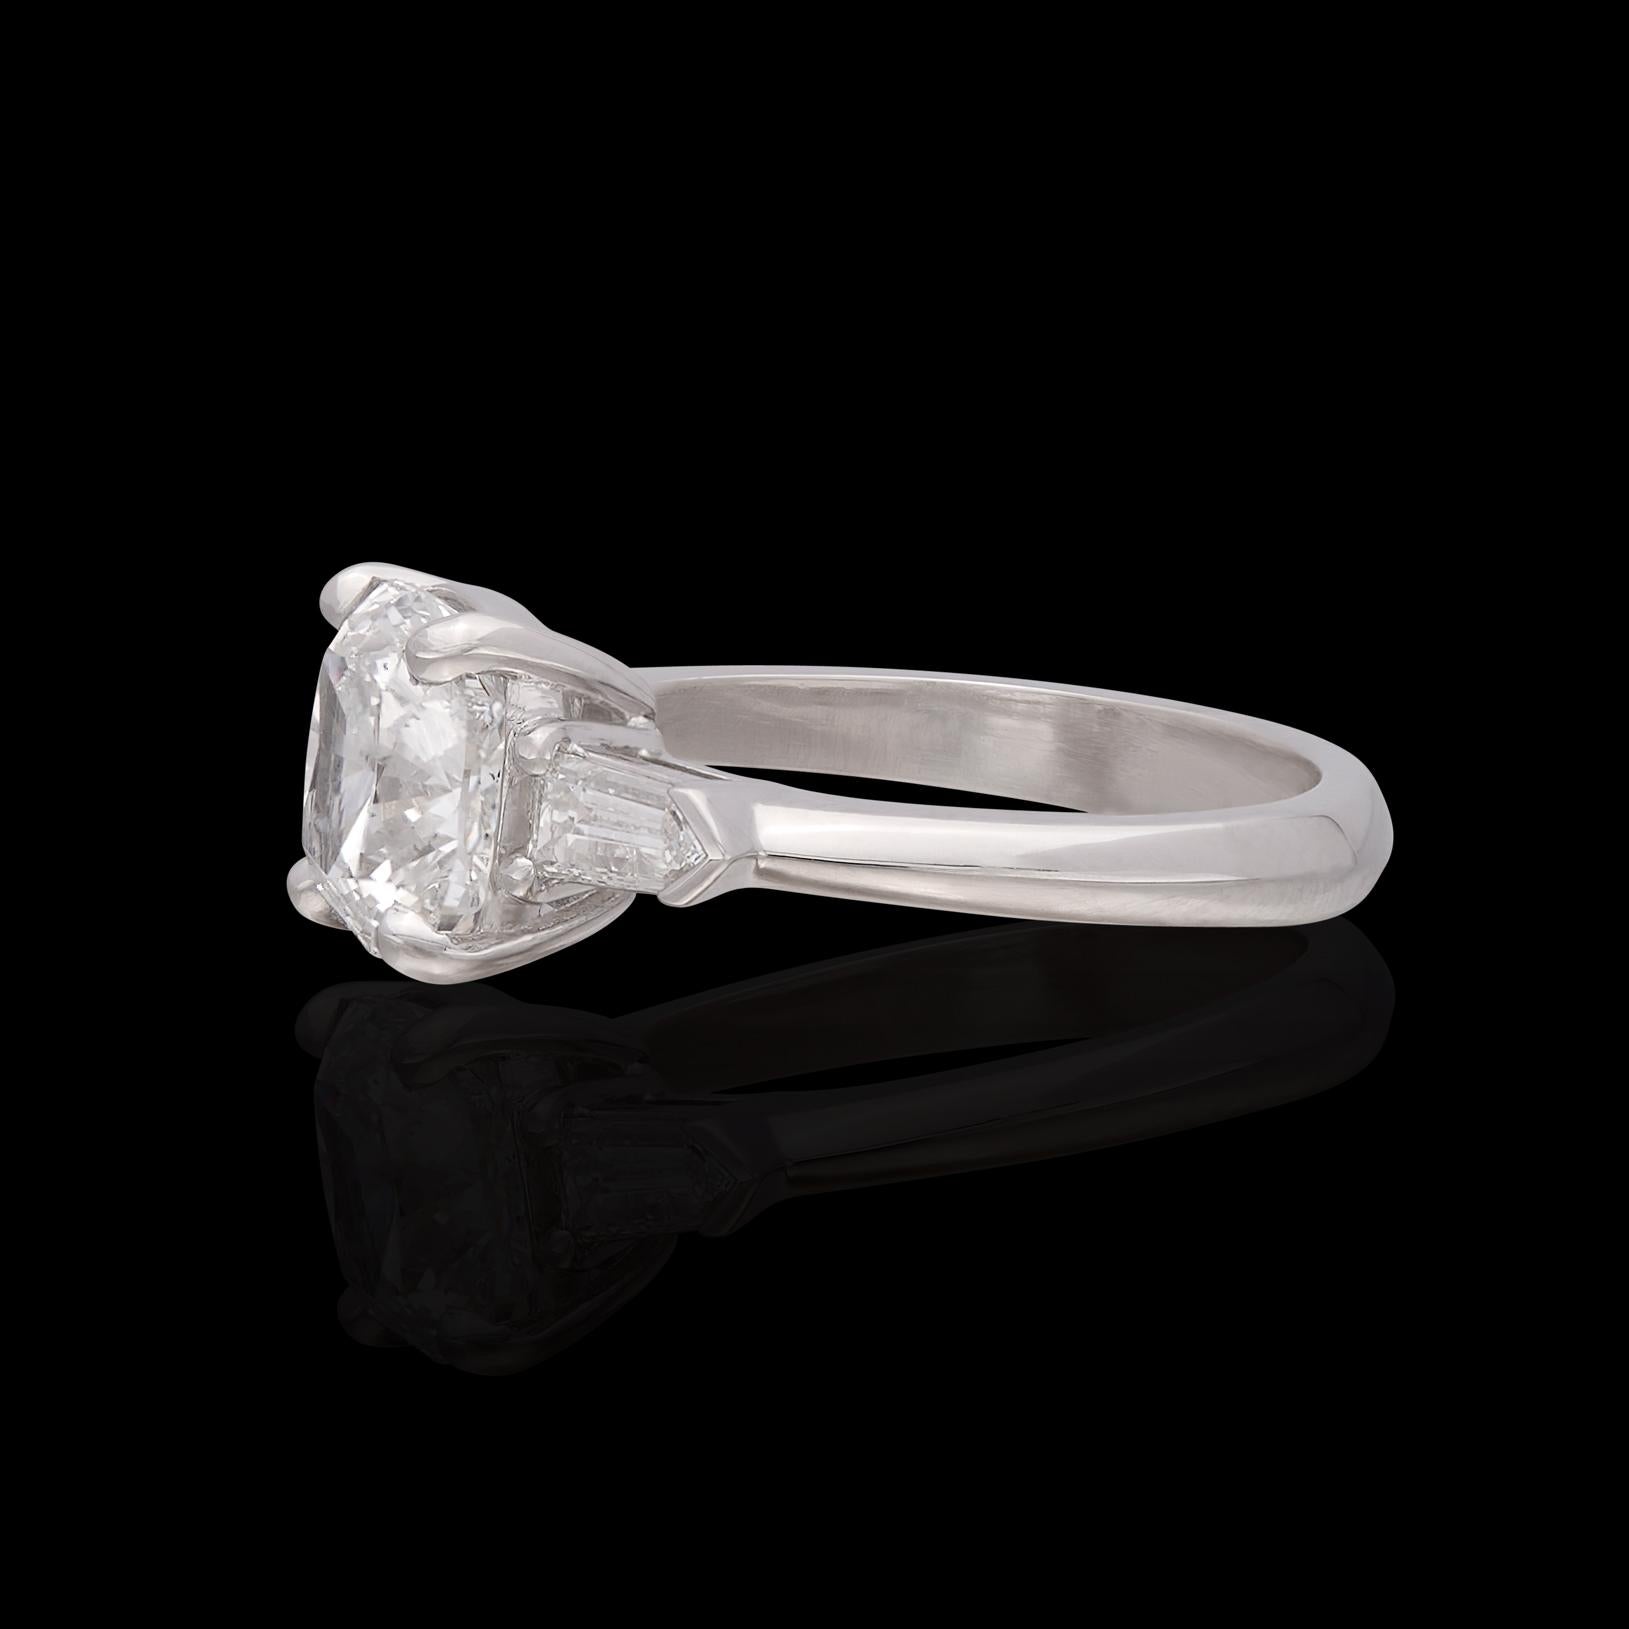 2.62ct GIA Cushion Cut Platinum Diamond Ring In New Condition For Sale In San Francisco, CA